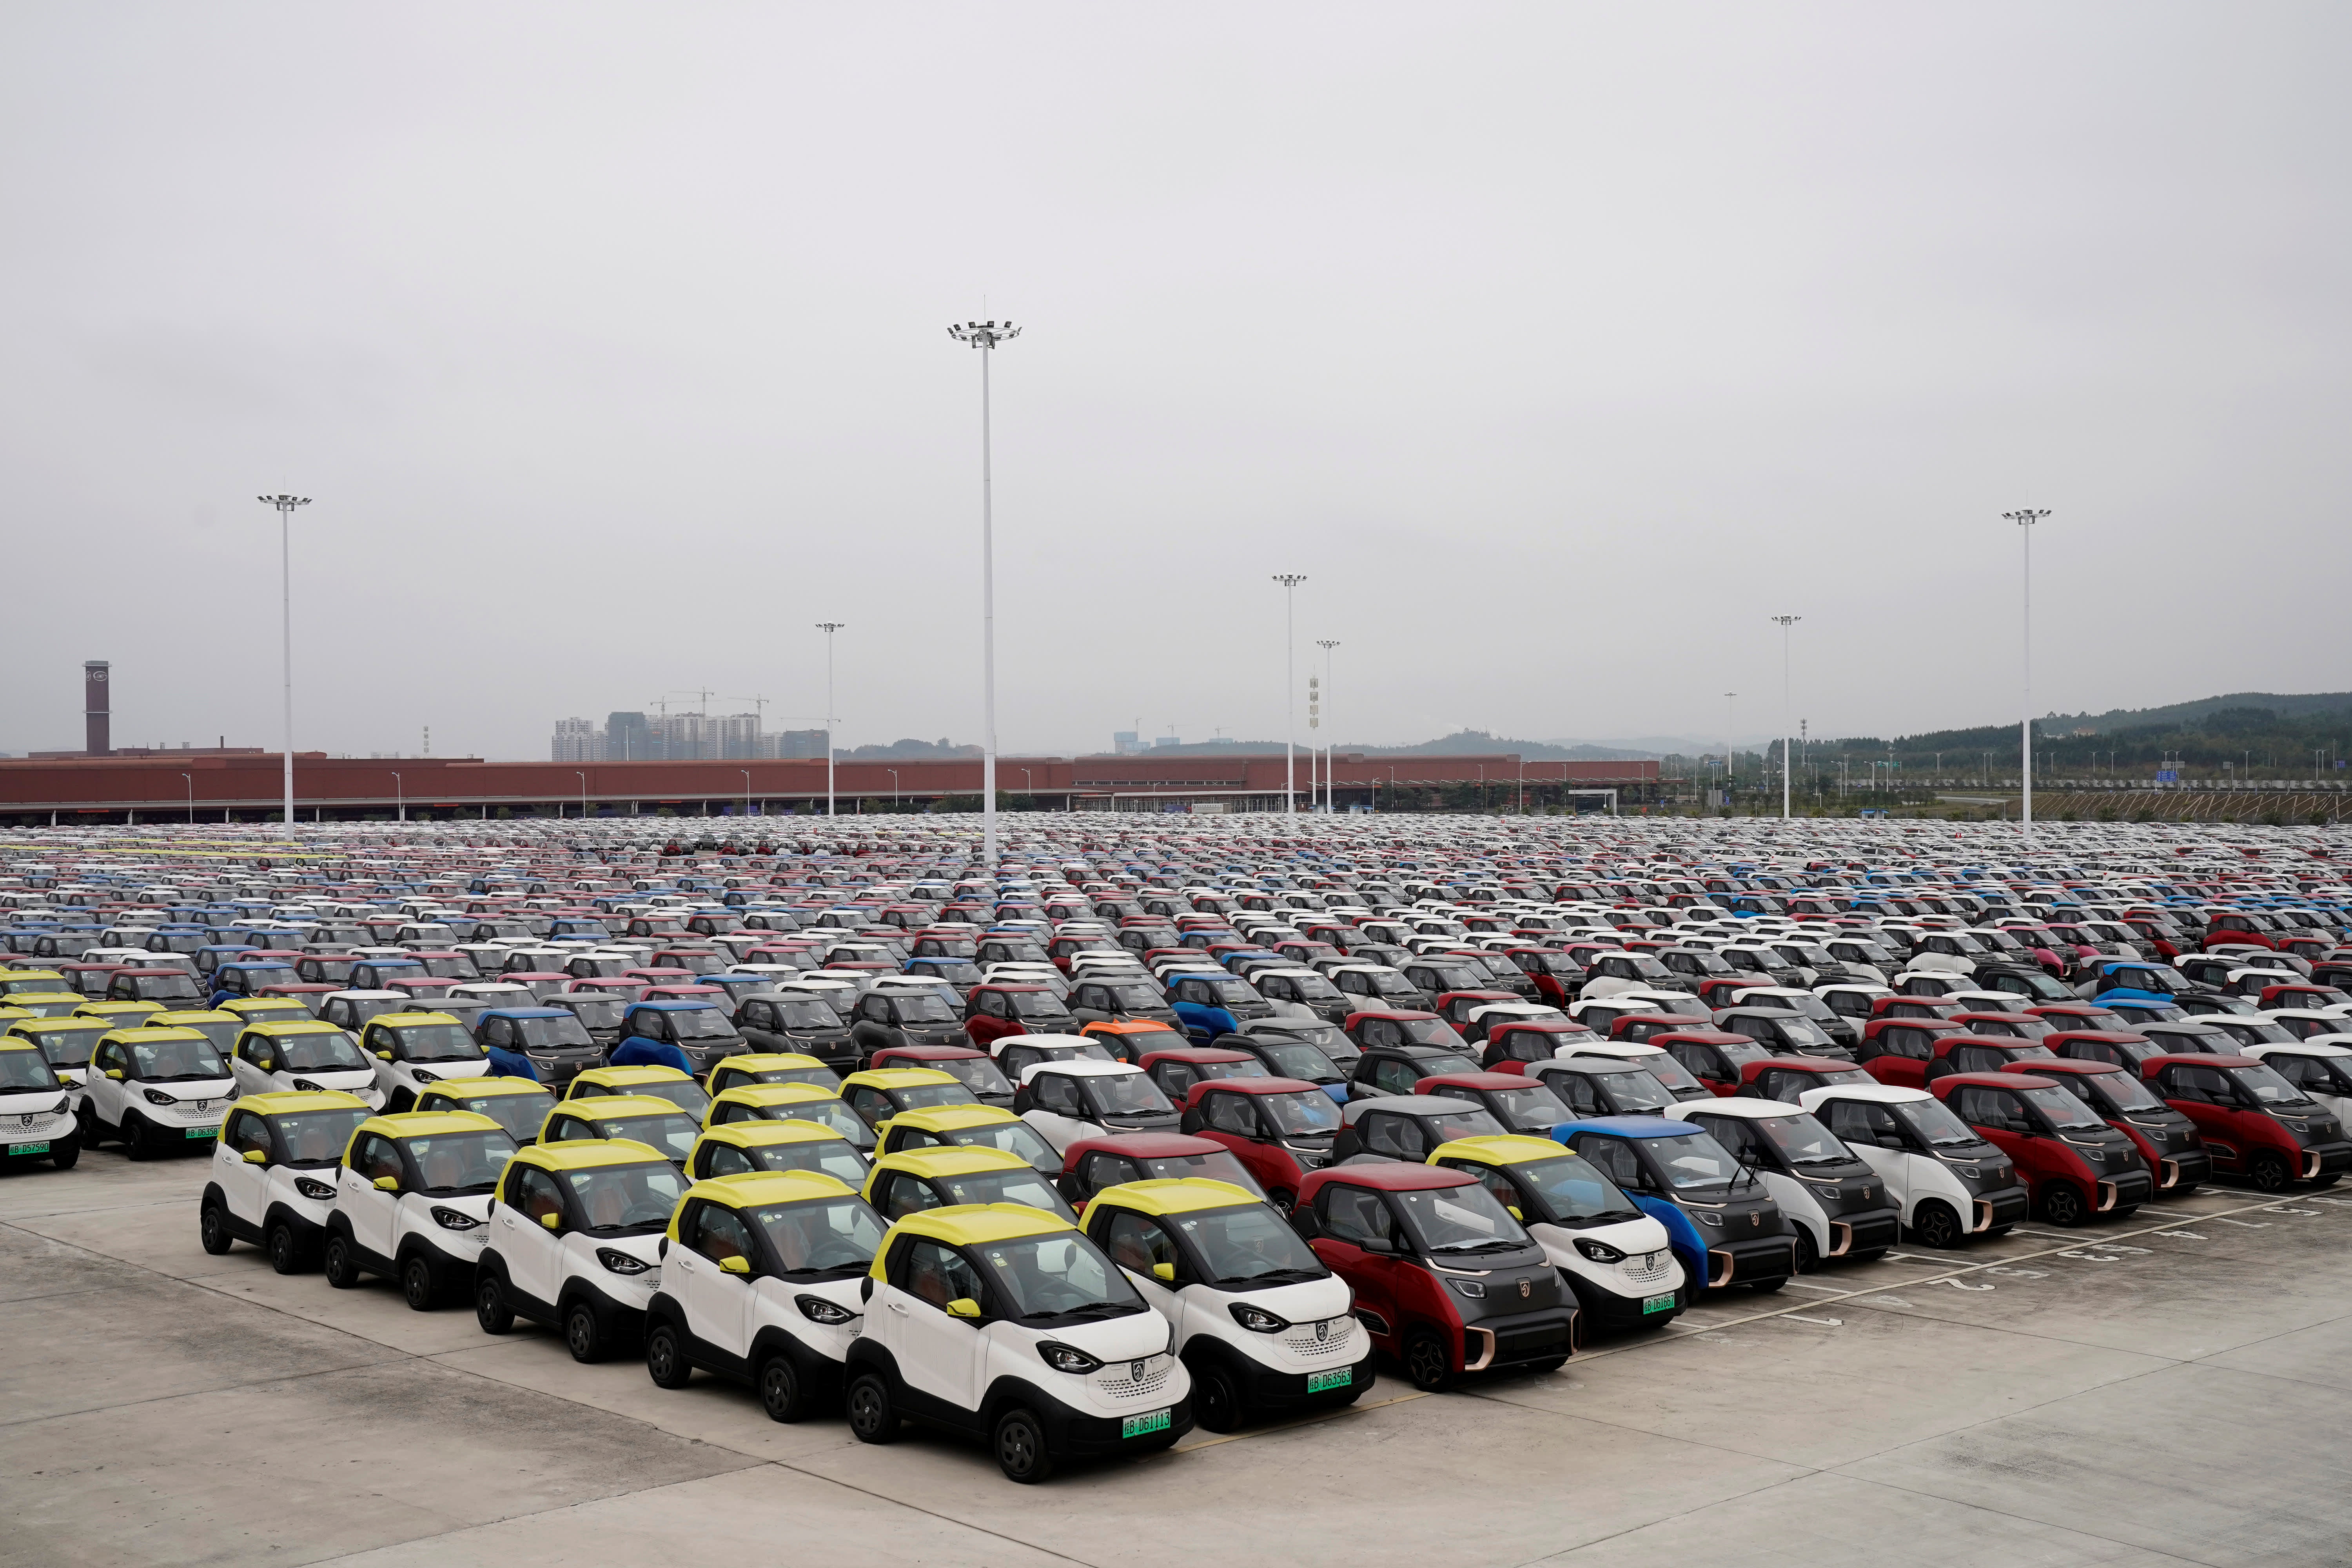 Why China is so far ahead of the U.S. in electric vehicle production